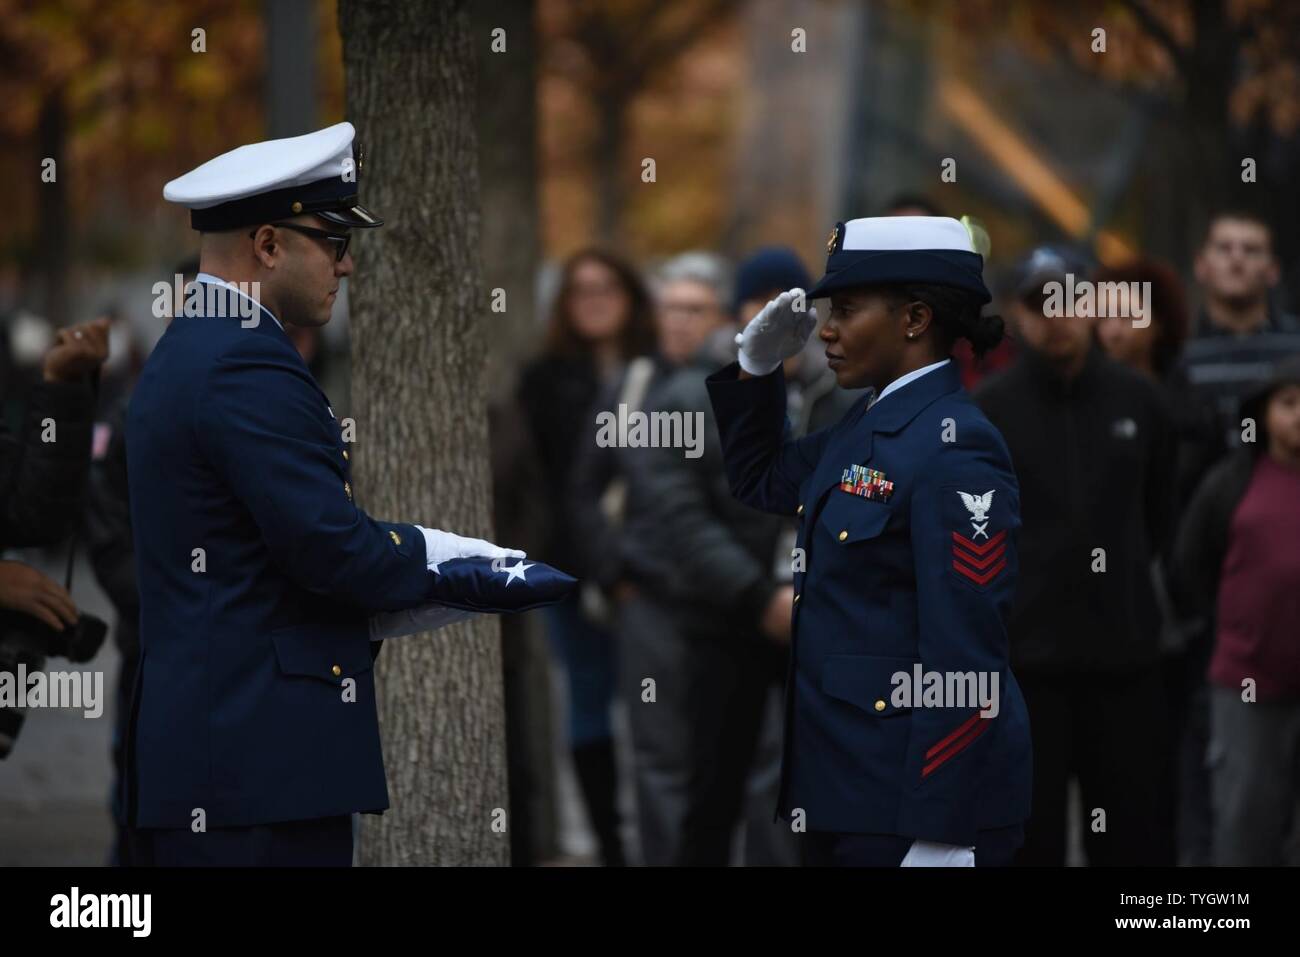 NEW YORK – U.S. Coast Guard Petty Officer 1st Class Tija Hopkins salutes Chief Petty Officer Juan Calderon during a ceremony honoring the Official Grand Marshals for the 2016 New York City Veterans Day Parade at the Freedom Tower in New York, Nov. 9, 2016. Calderon and Hopkins are both members of the U.S. Coast Guard Sector New York Ceremonial Color Guard. Stock Photo